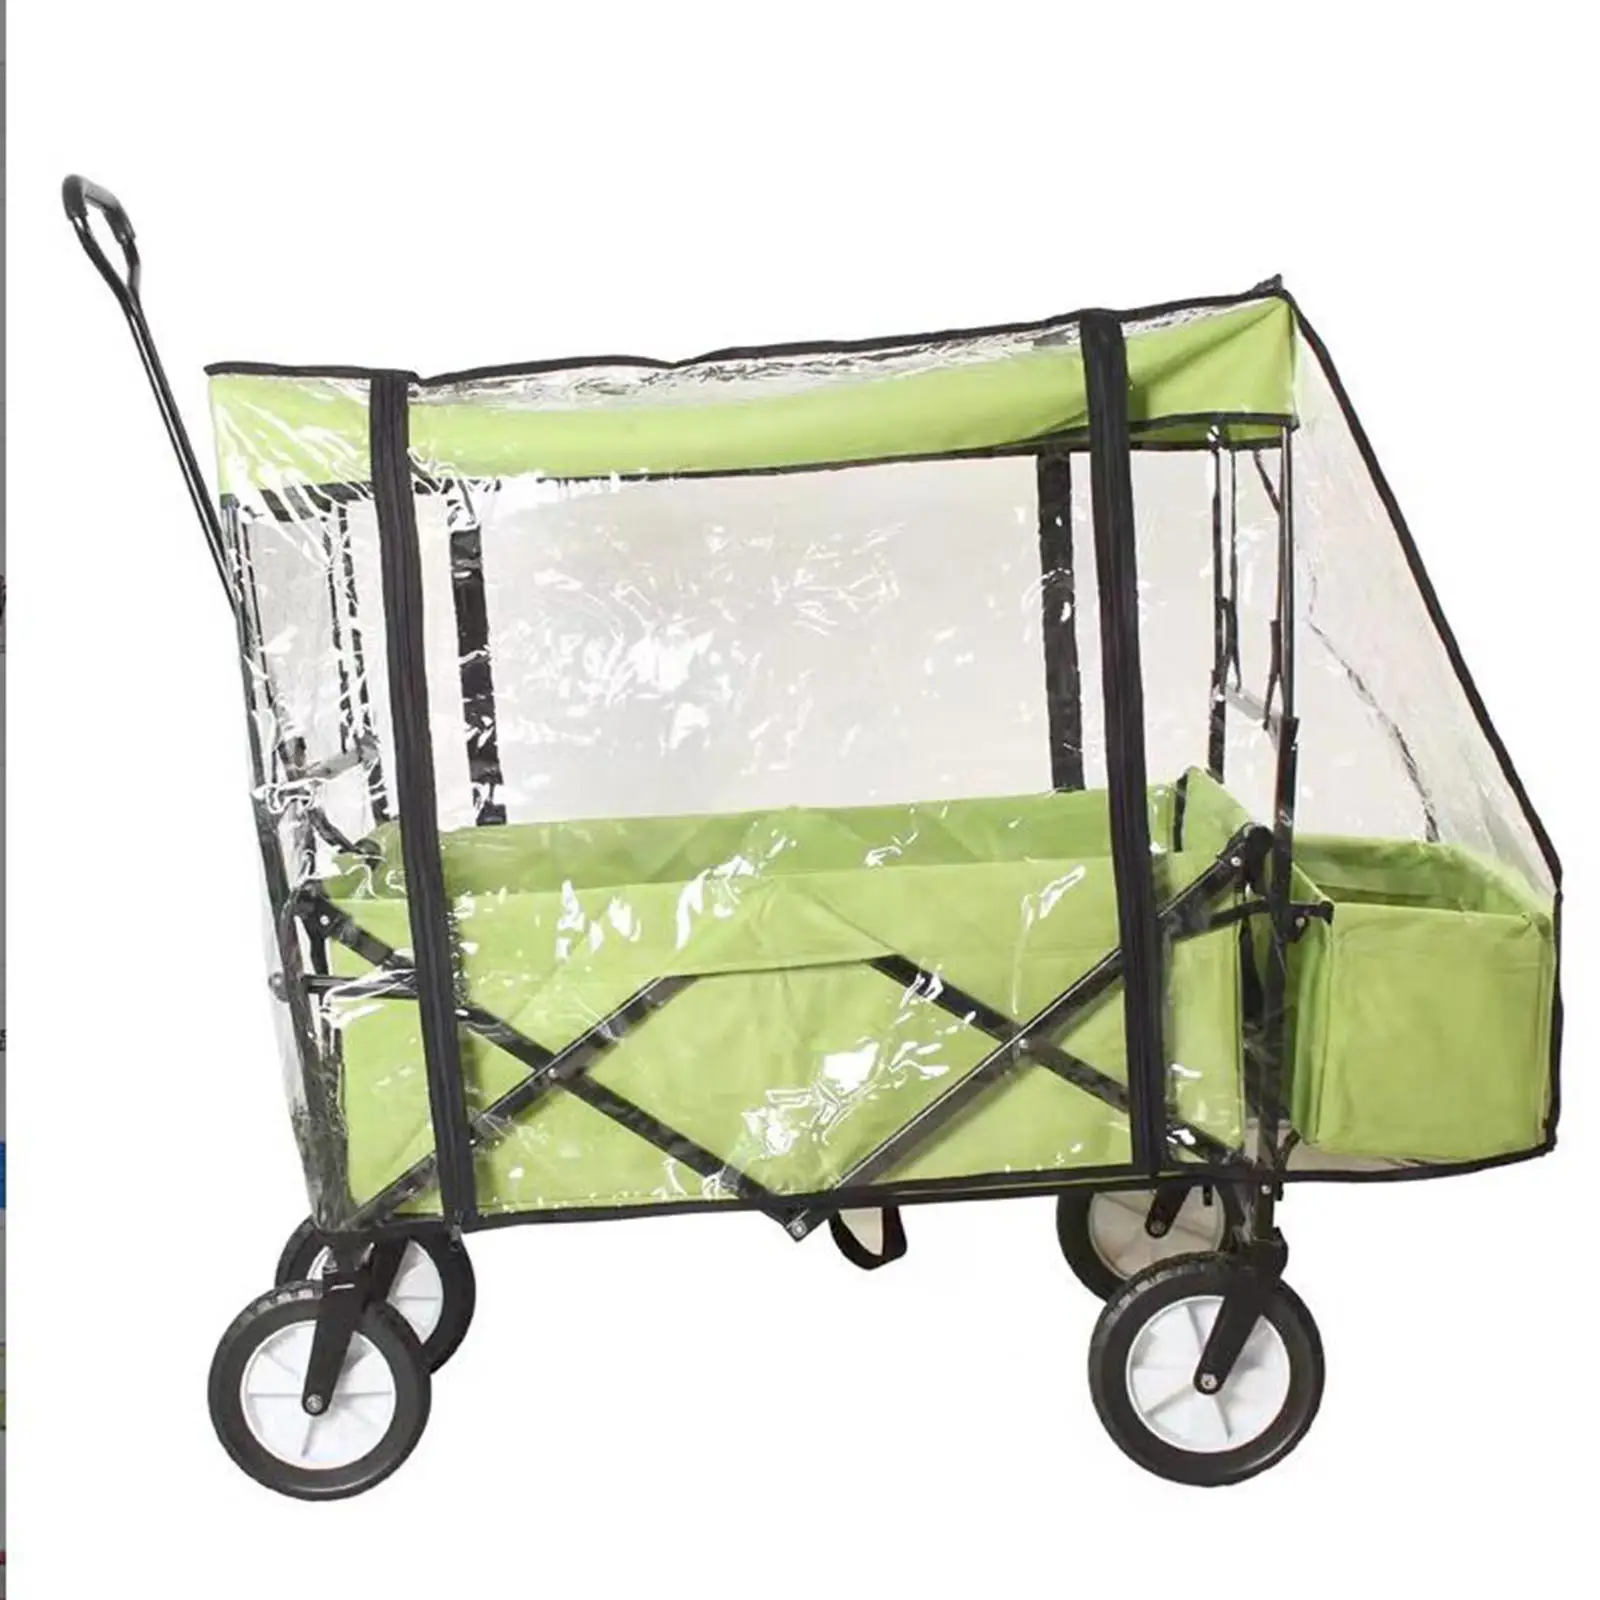 Collapsible Wagon Cart Waterproof Cover Canopy Sturdy Windproof for Shopping